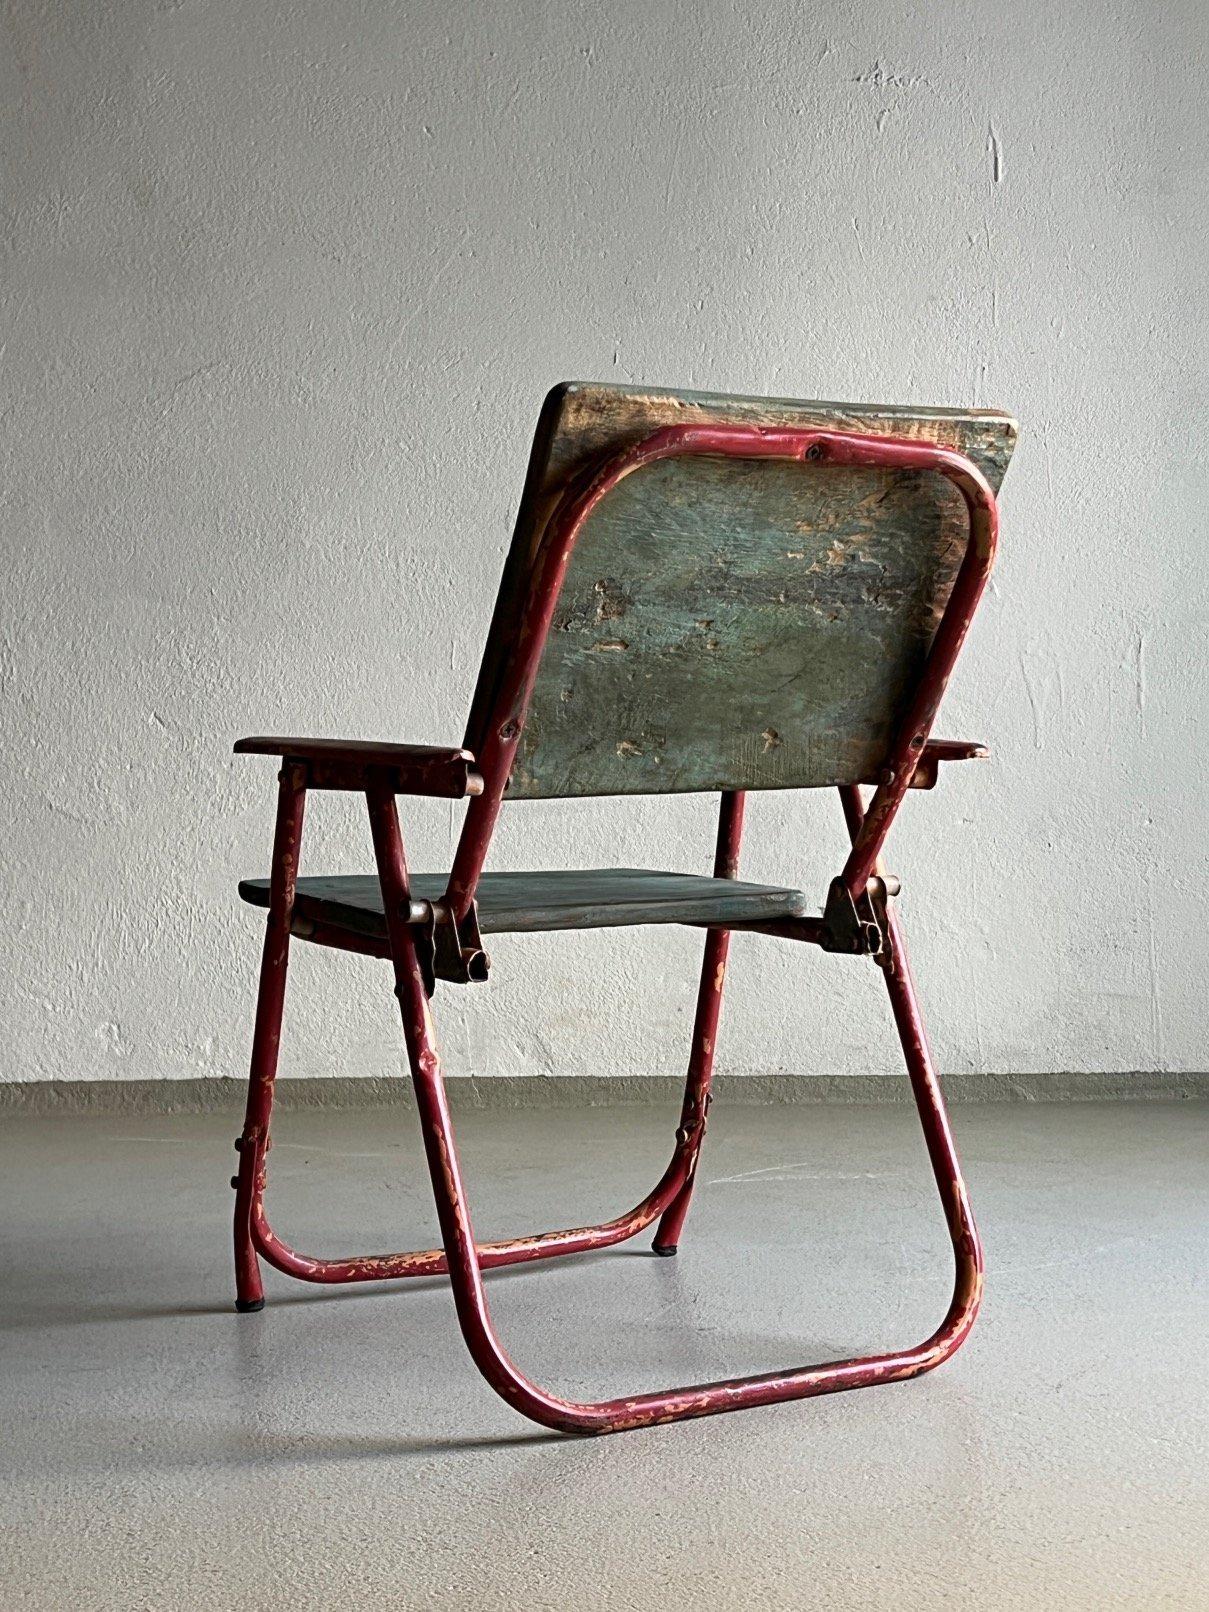 Dutch Industrial Folding Kids Chair, 1930s For Sale